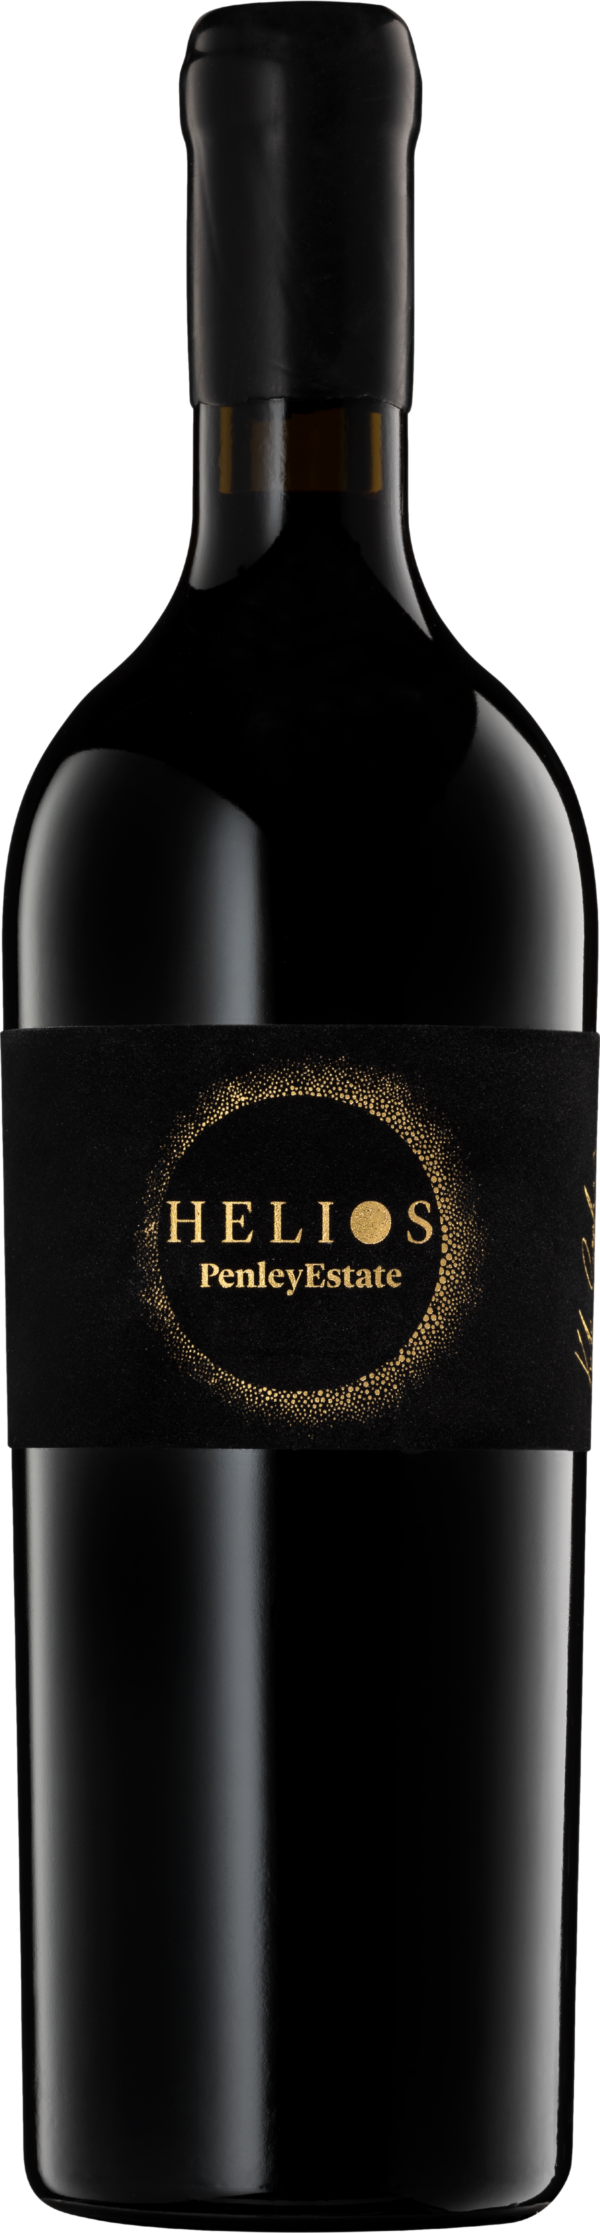 Product image of Penley Estate Helios Cabernet Sauvignon 2018 from 8wines